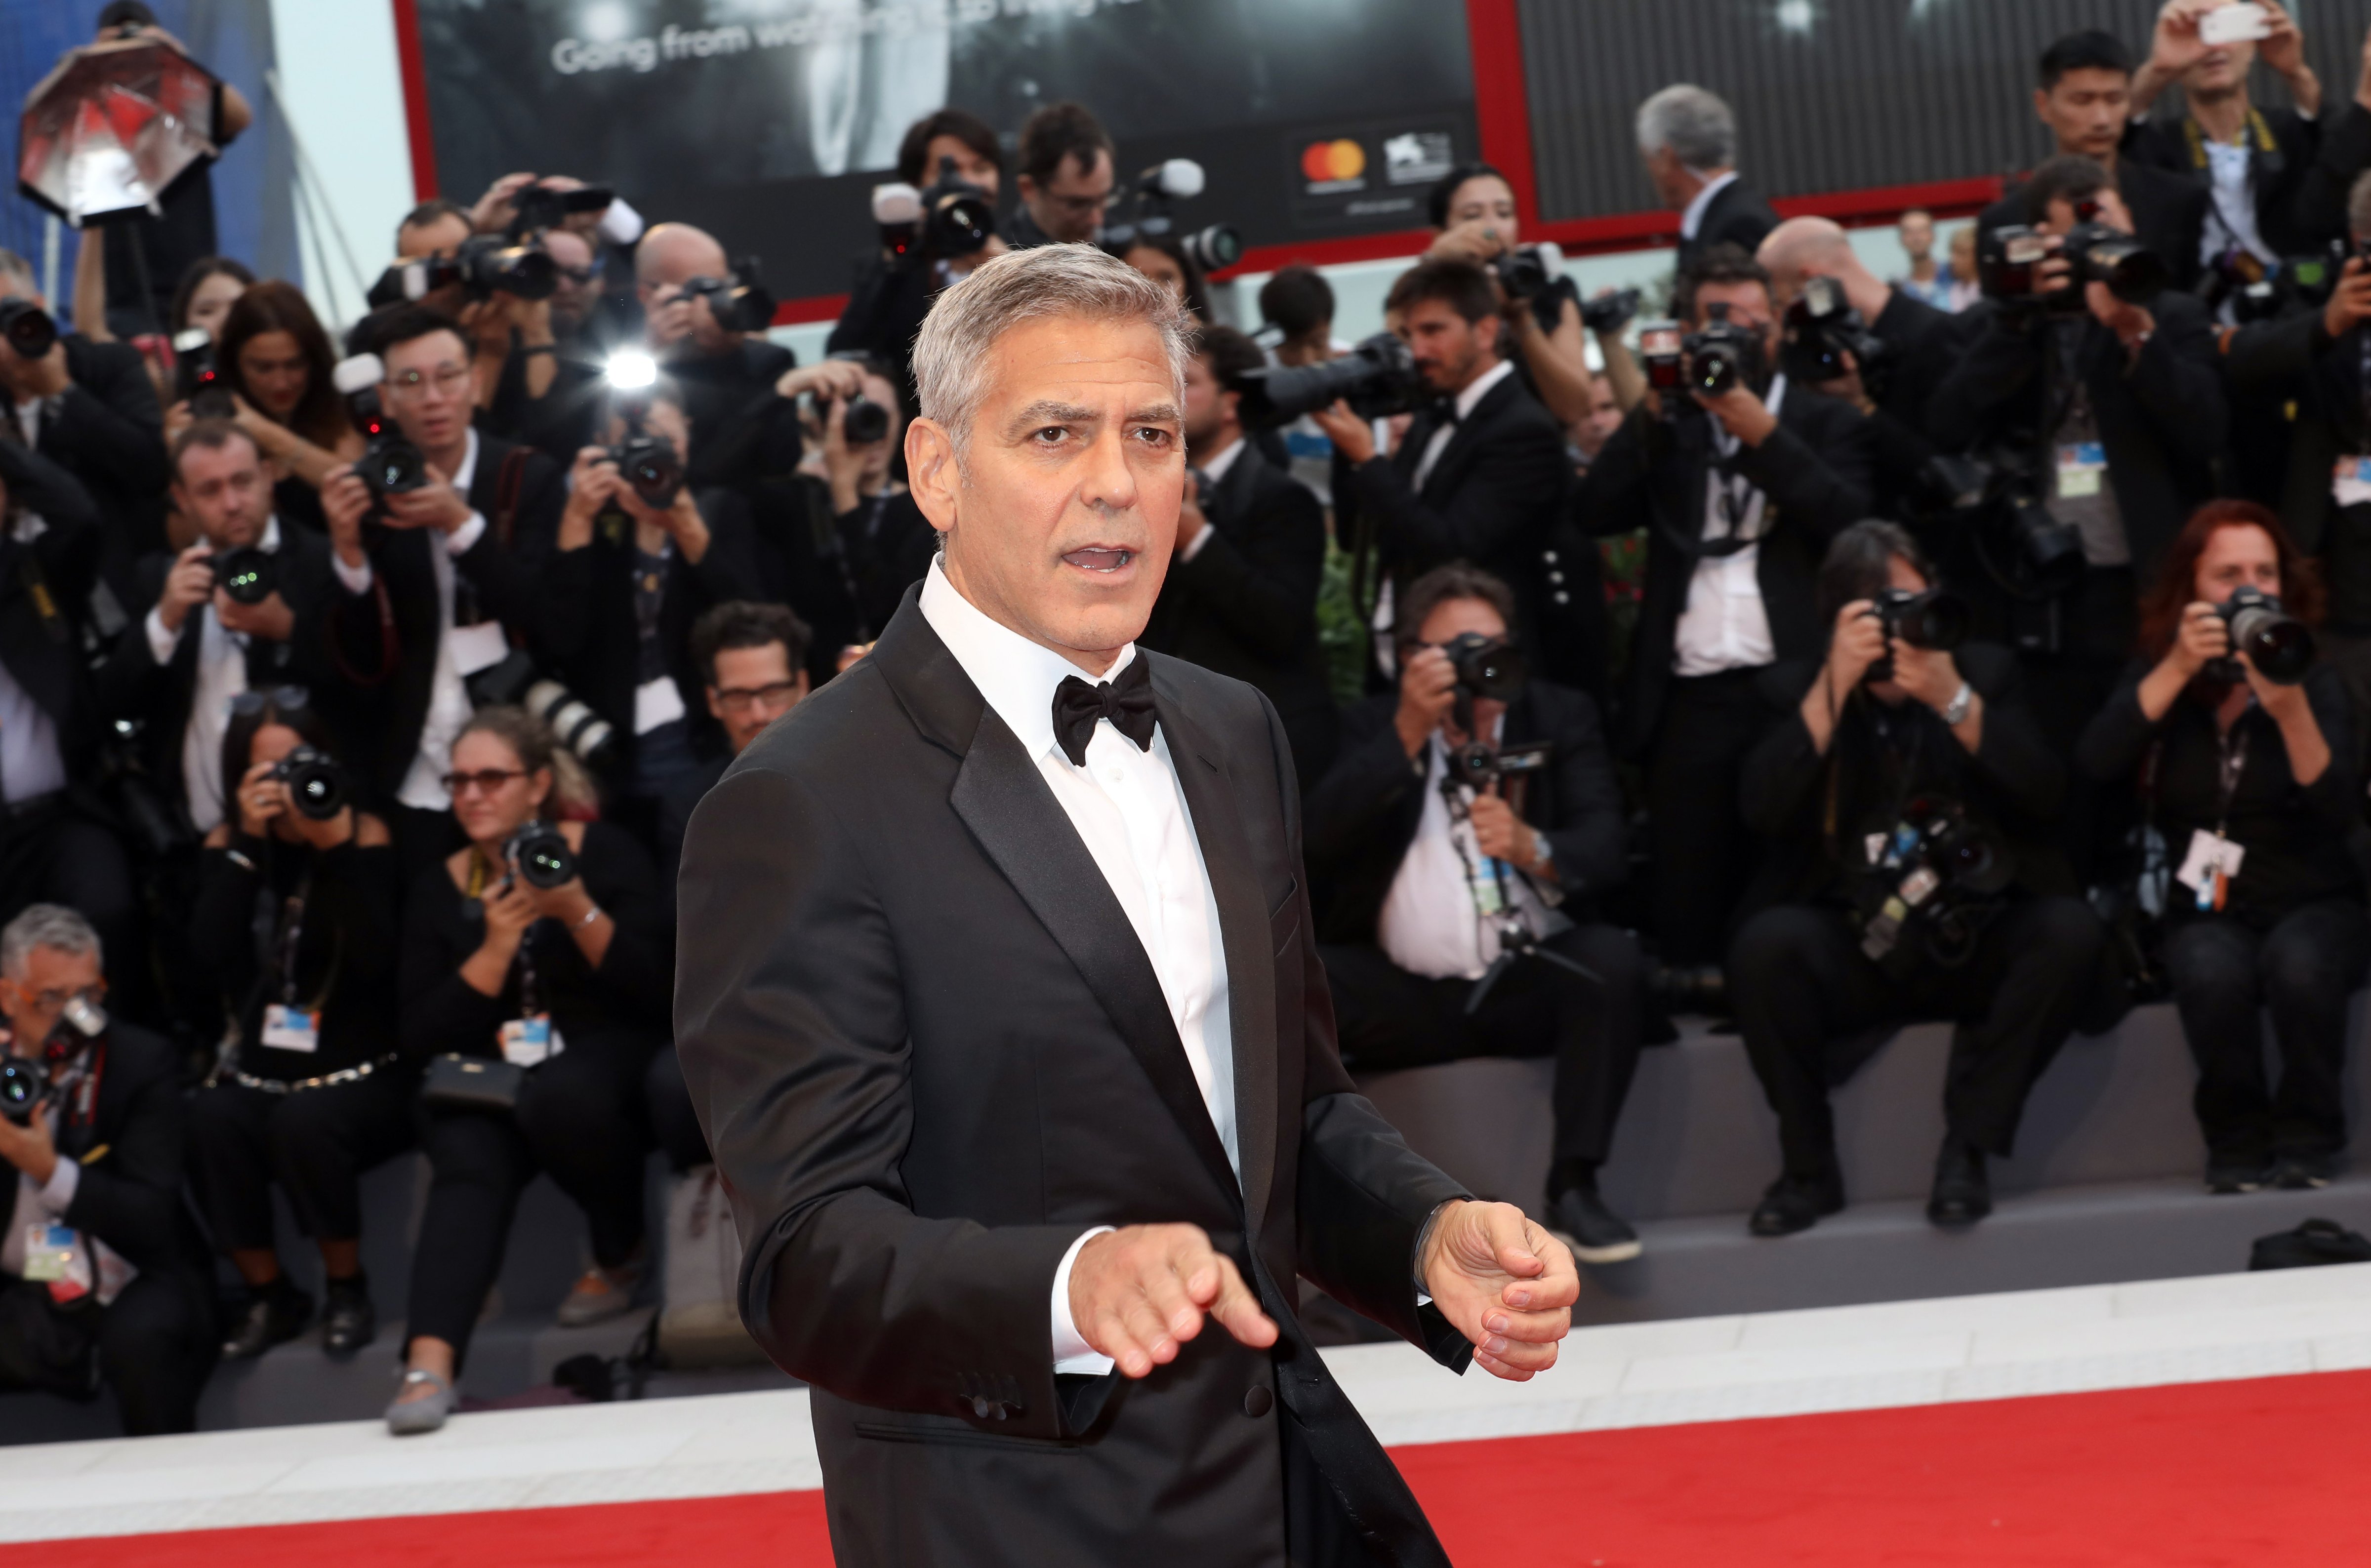 George Clooney walks the red carpet ahead of the 'Suburbicon' screening during the 74th Venice Film Festival at Sala Grande on September 2, 2017 in Venice, Italy. (Photography by Elisabetta A. Villa—WireImage/Getty)